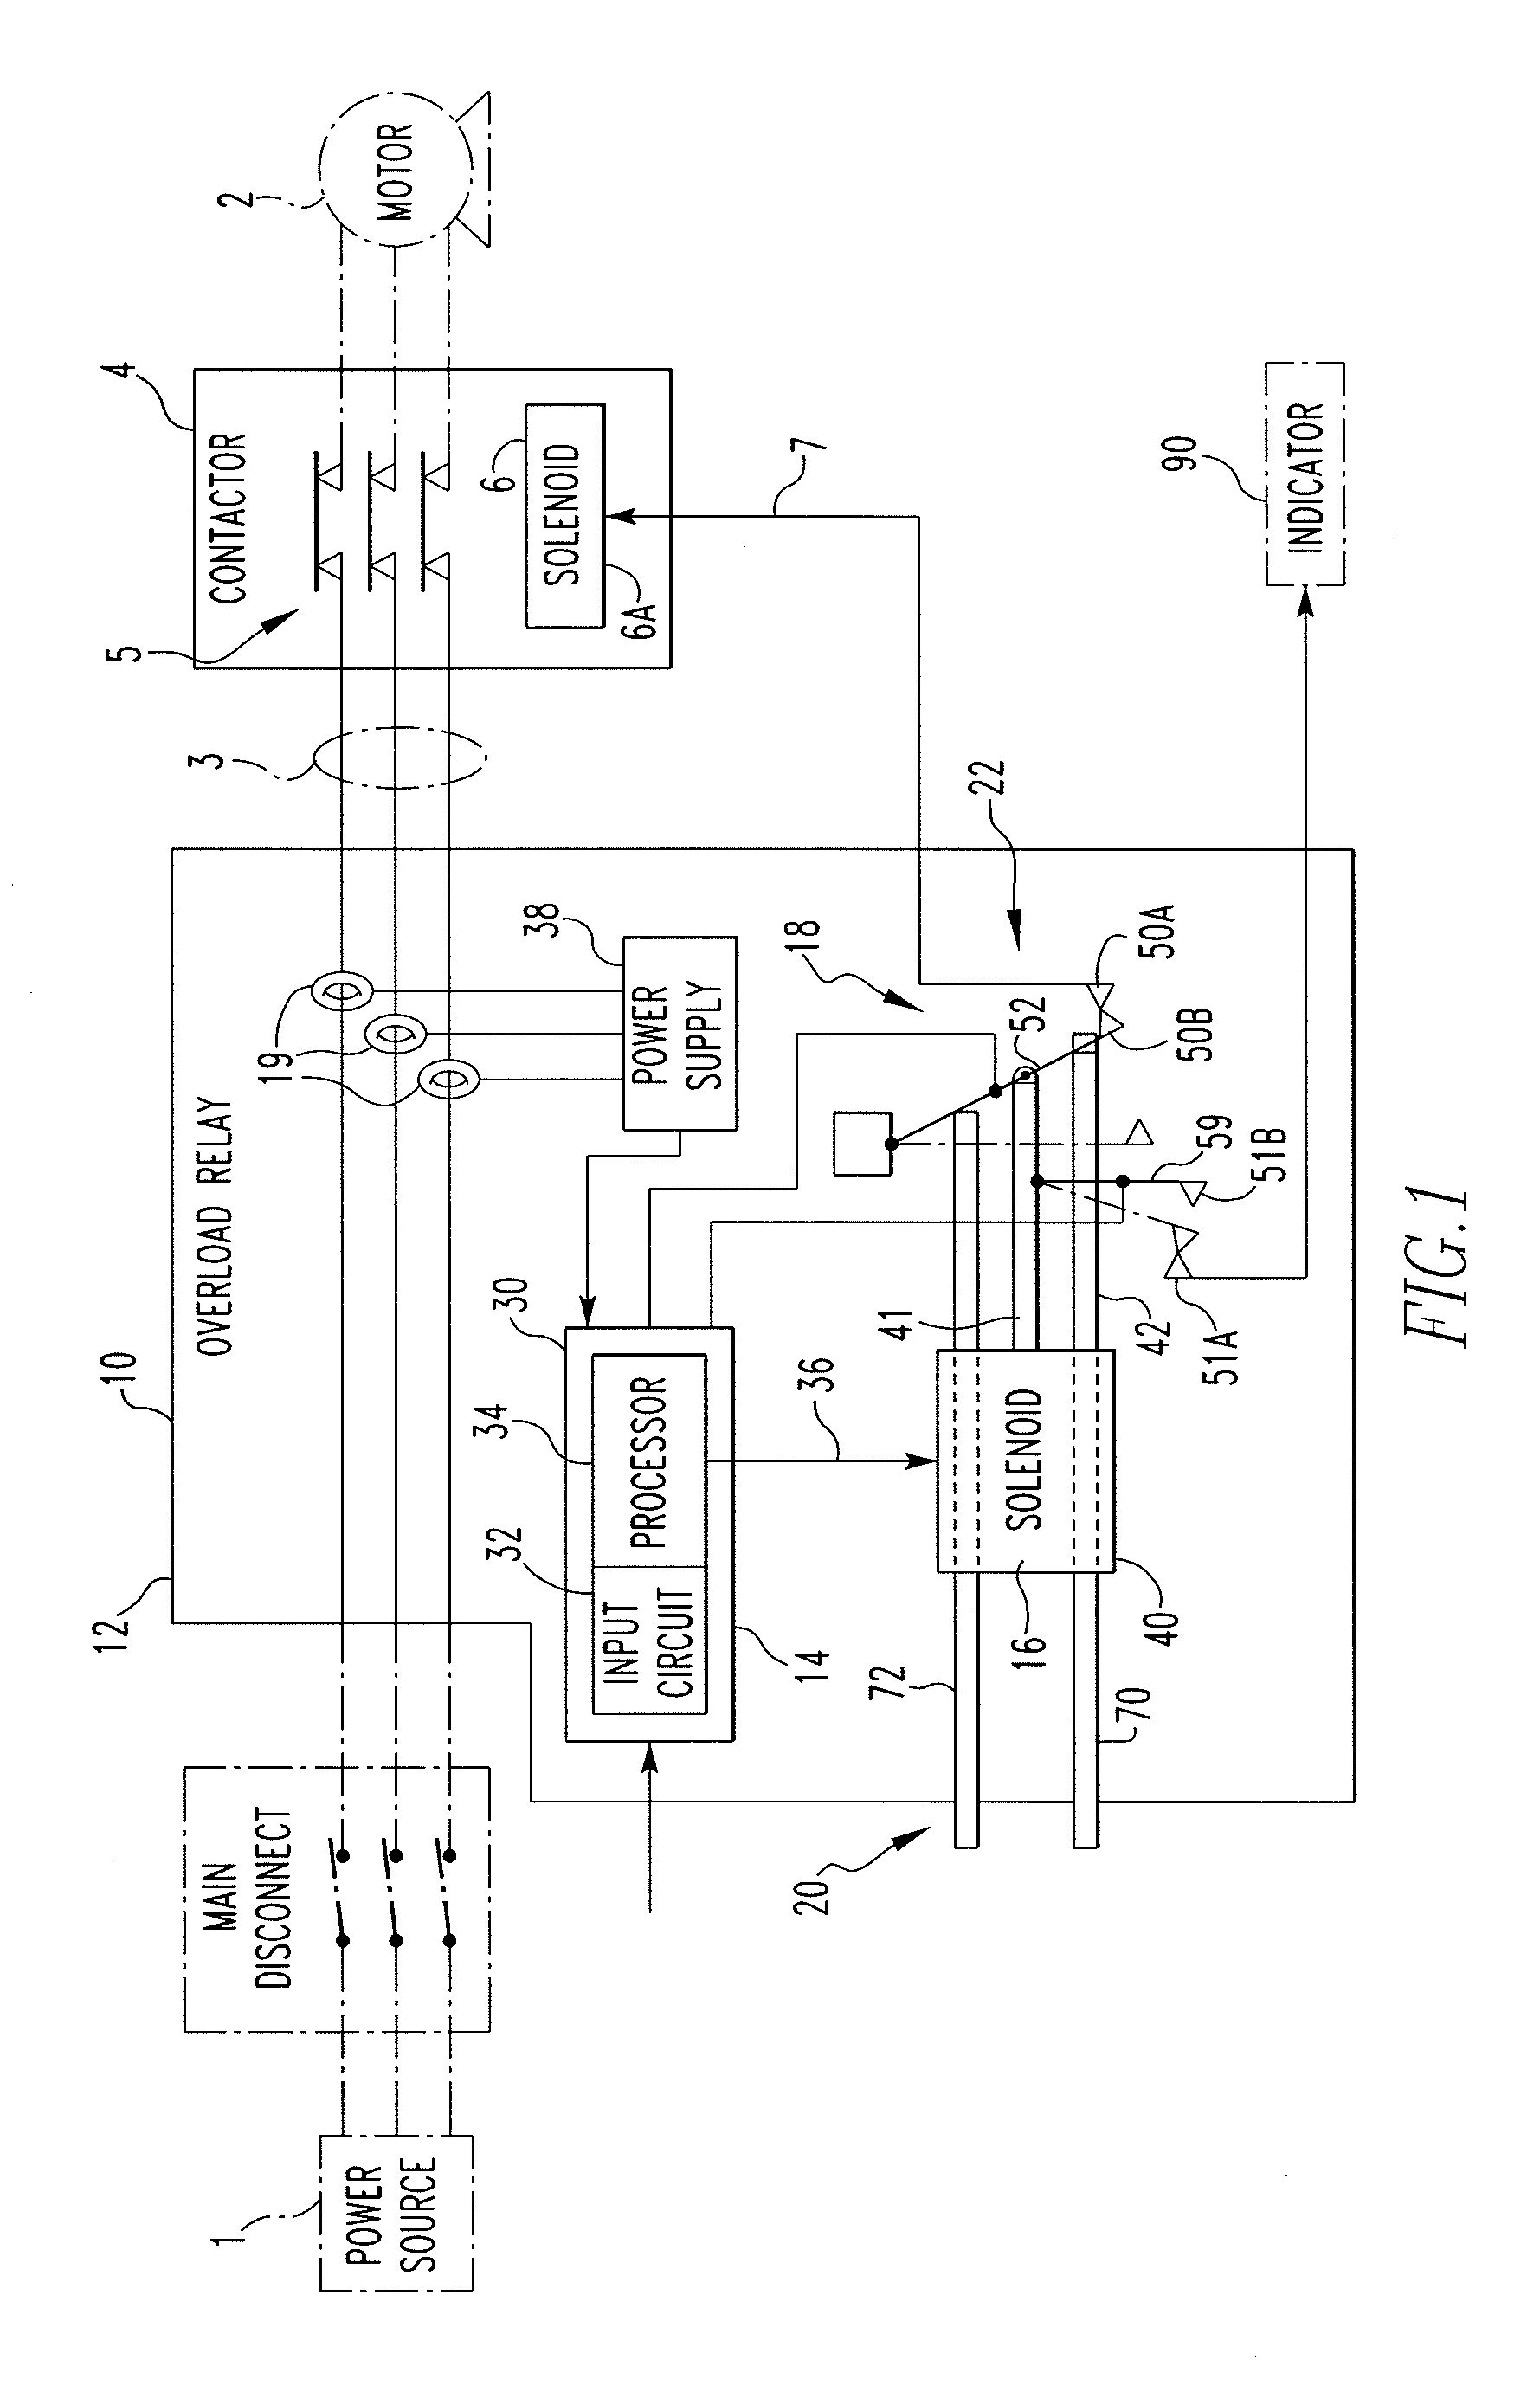 Overload relay switch without springs